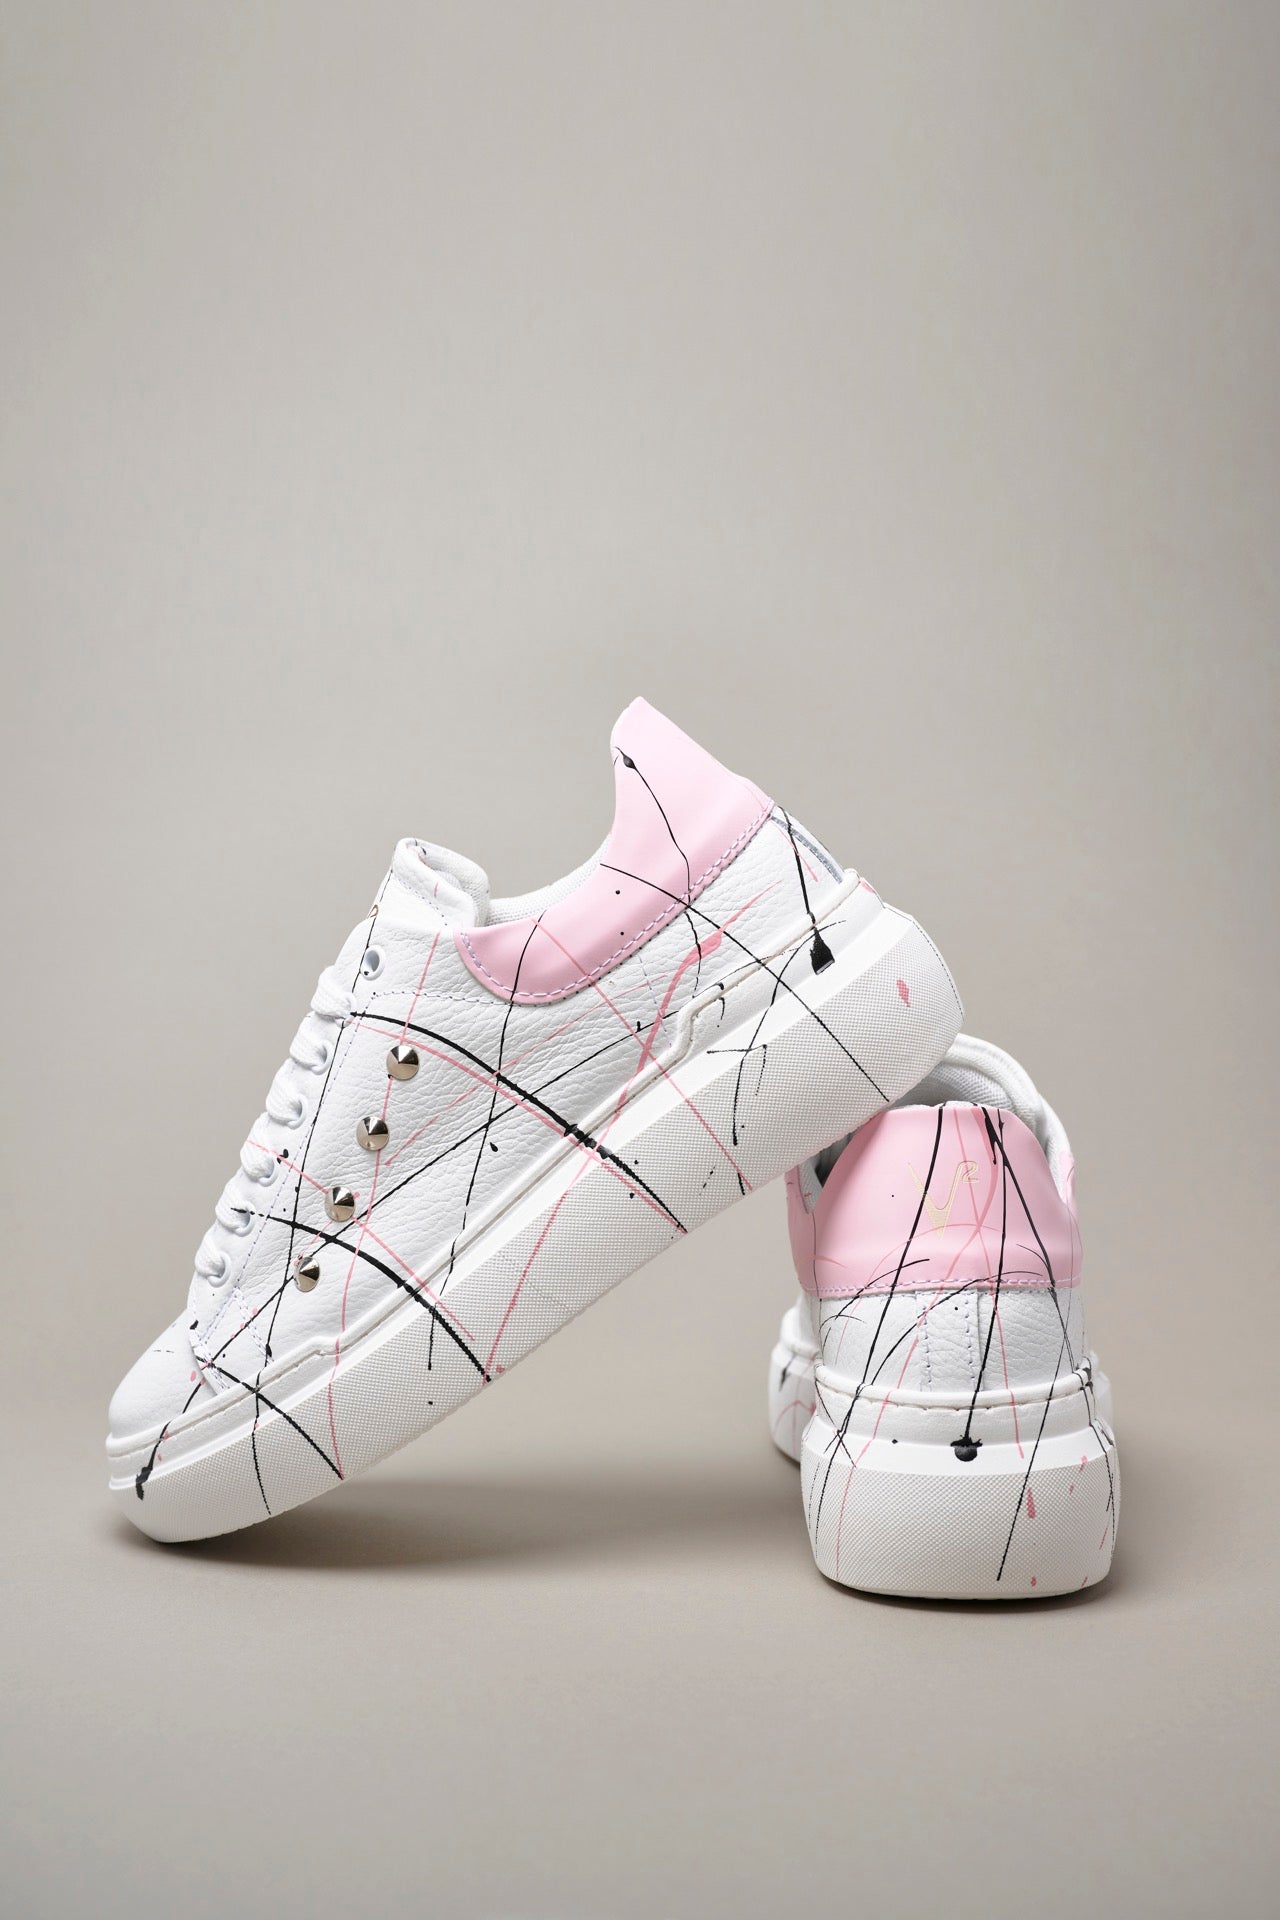 HAMMER - High sole sneakers in hammered leather with Pastel Pink back with studs and splashes of paint